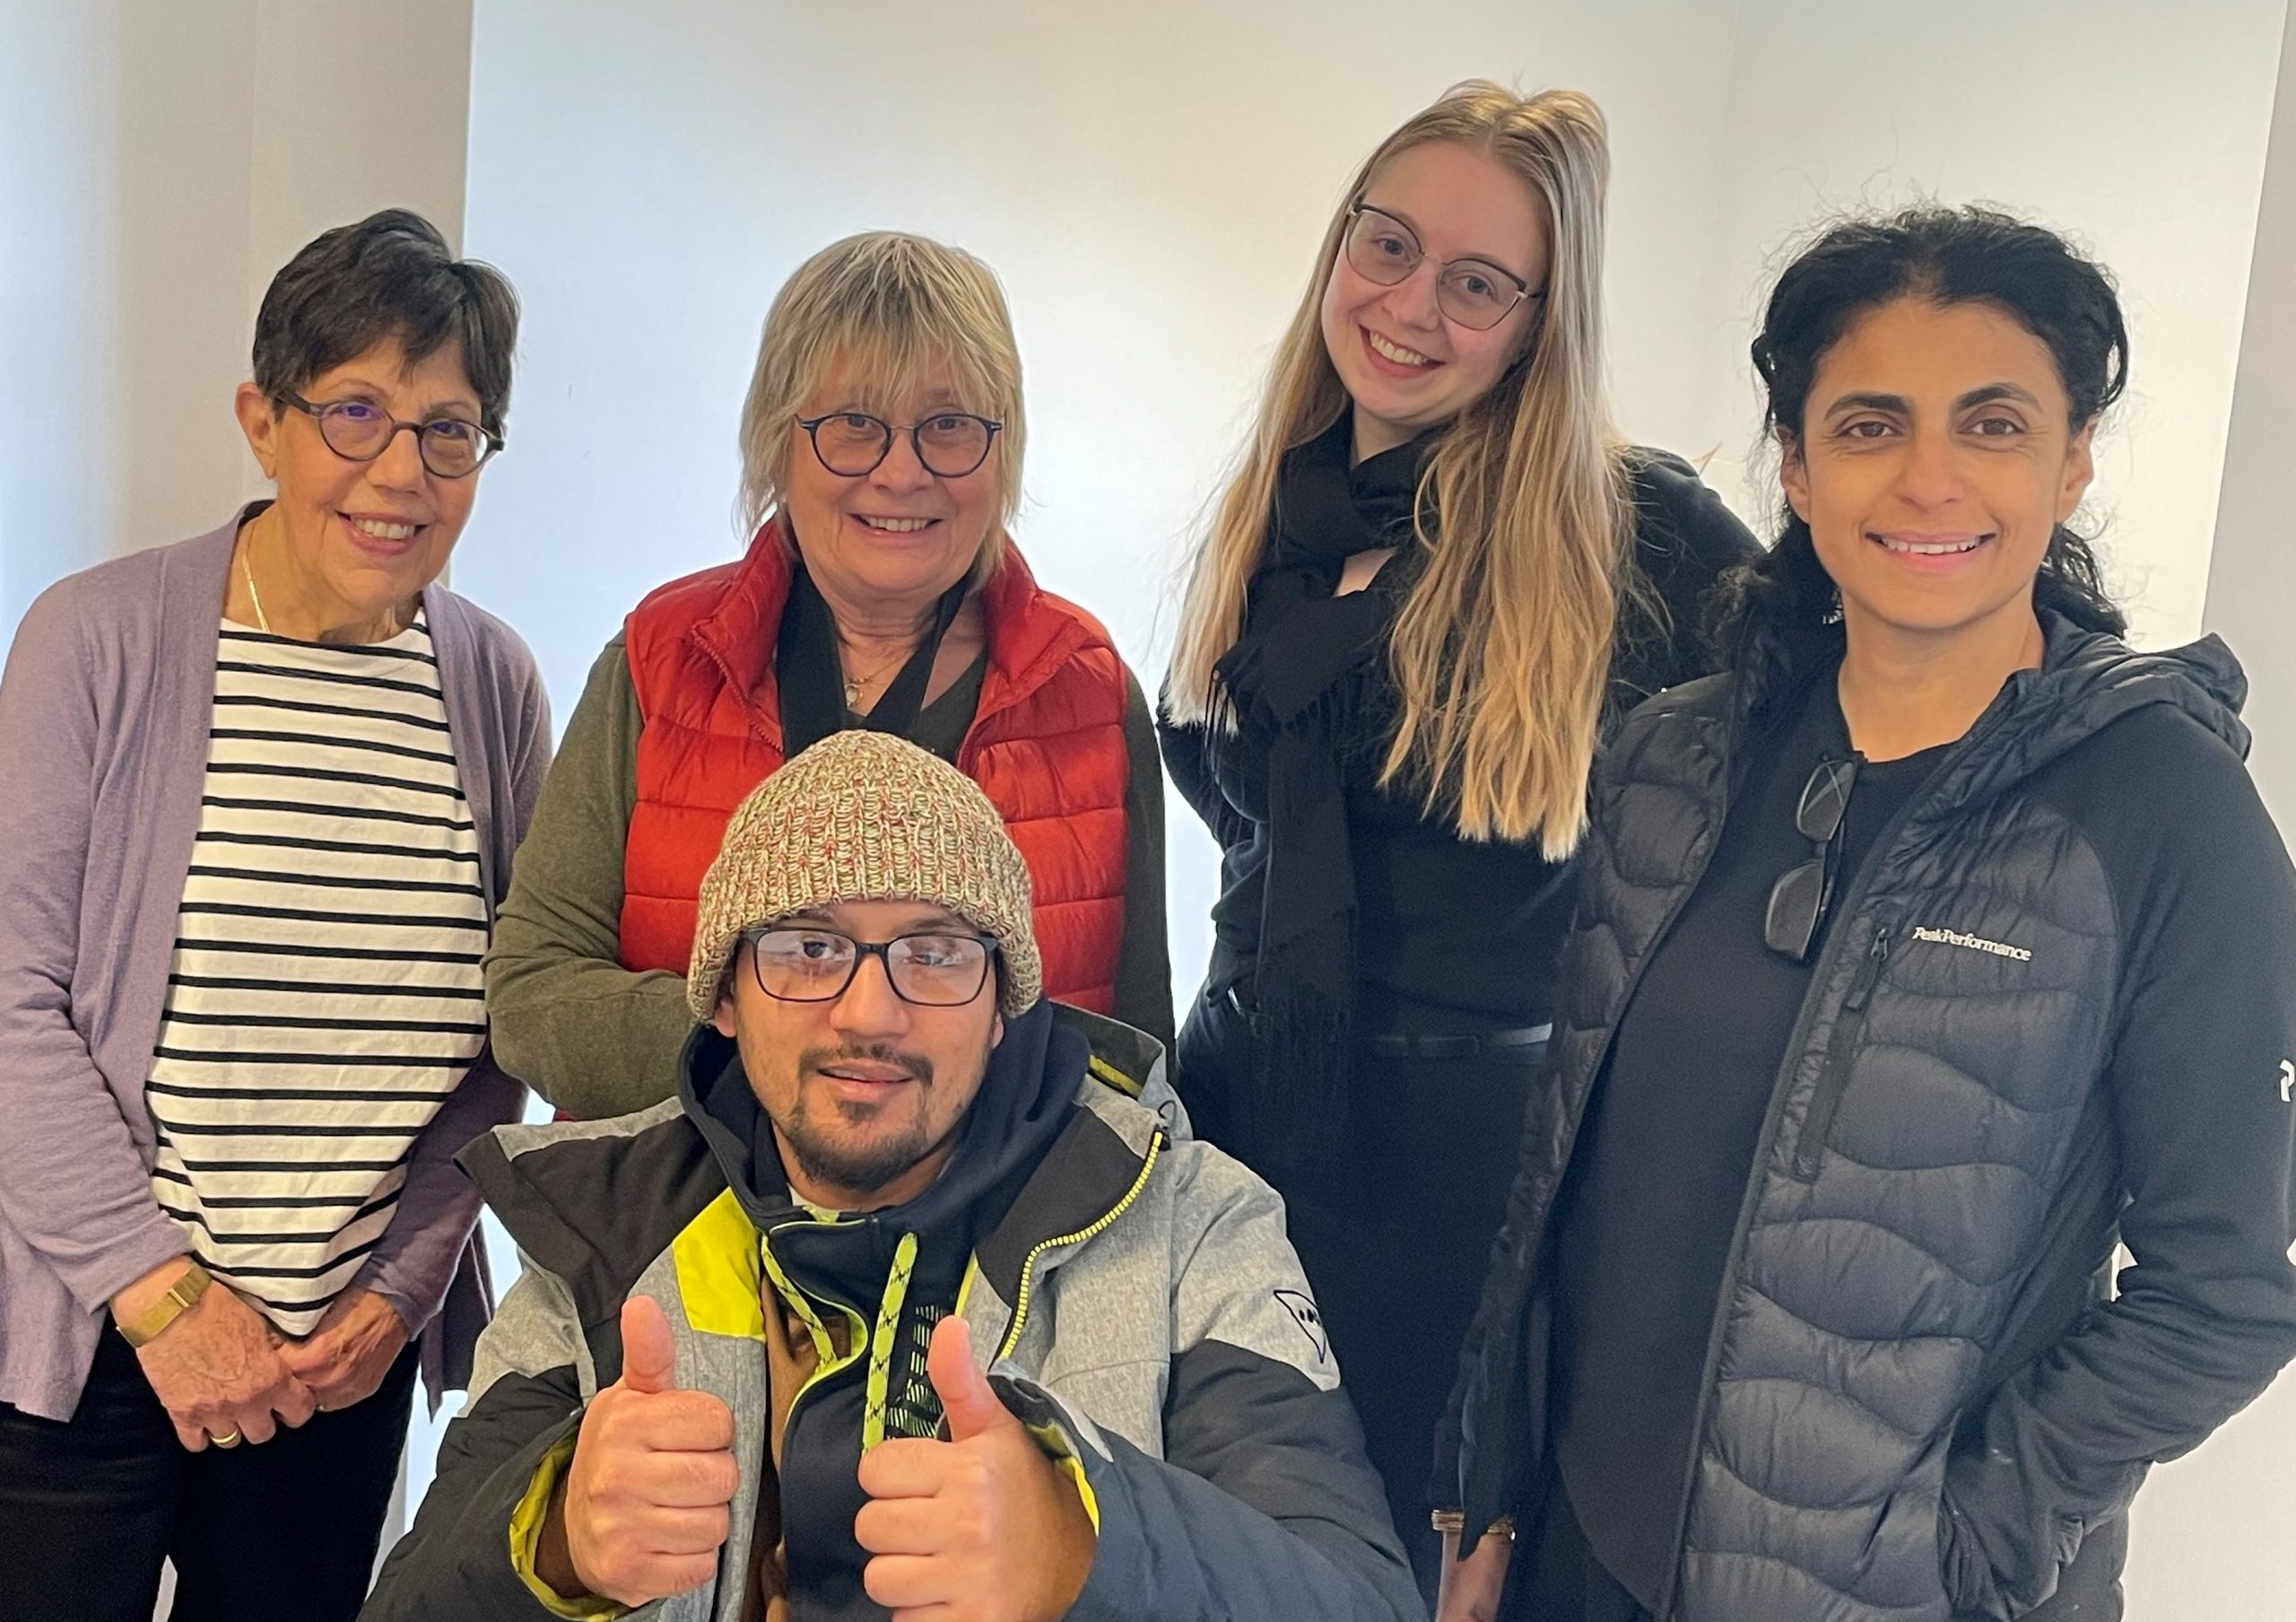 Vision Care for Homeless People volunteers, back row, left to right: Debra Farbey; Jane Partridge, CLO; Penny Ardley FBDO and Tazeen Haider, optometrist. Front row: client Sahid Uddin